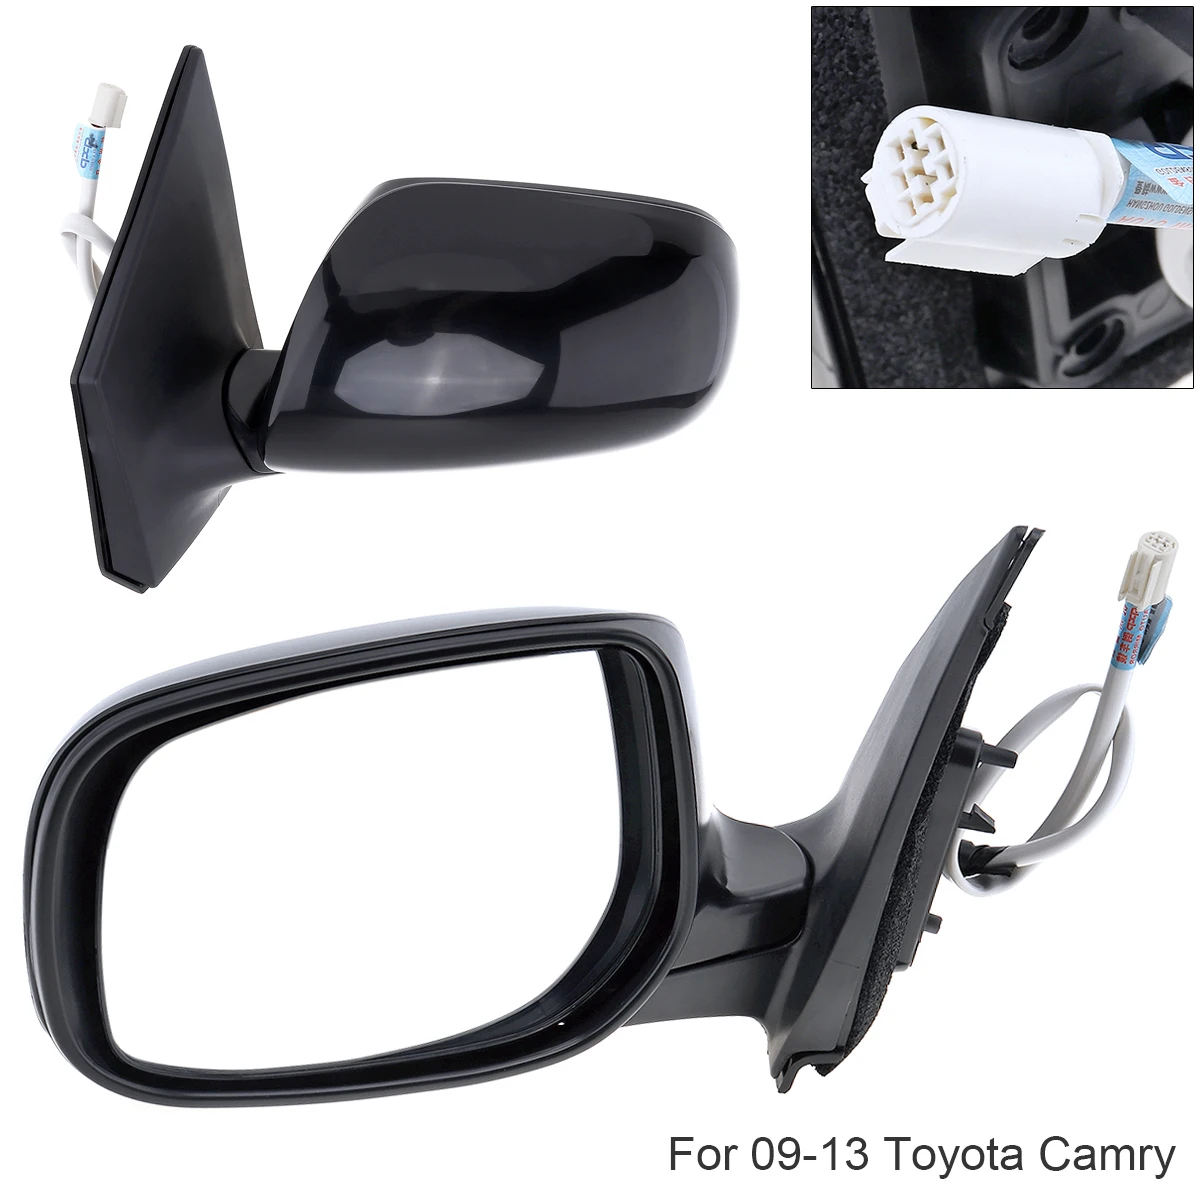 

1 Pcs Non-Folding Durable Left Side Mirror Non-Heated Left Hand LH Mirror 87910-02830 Fit for Toyota Corolla 09-13 Cars